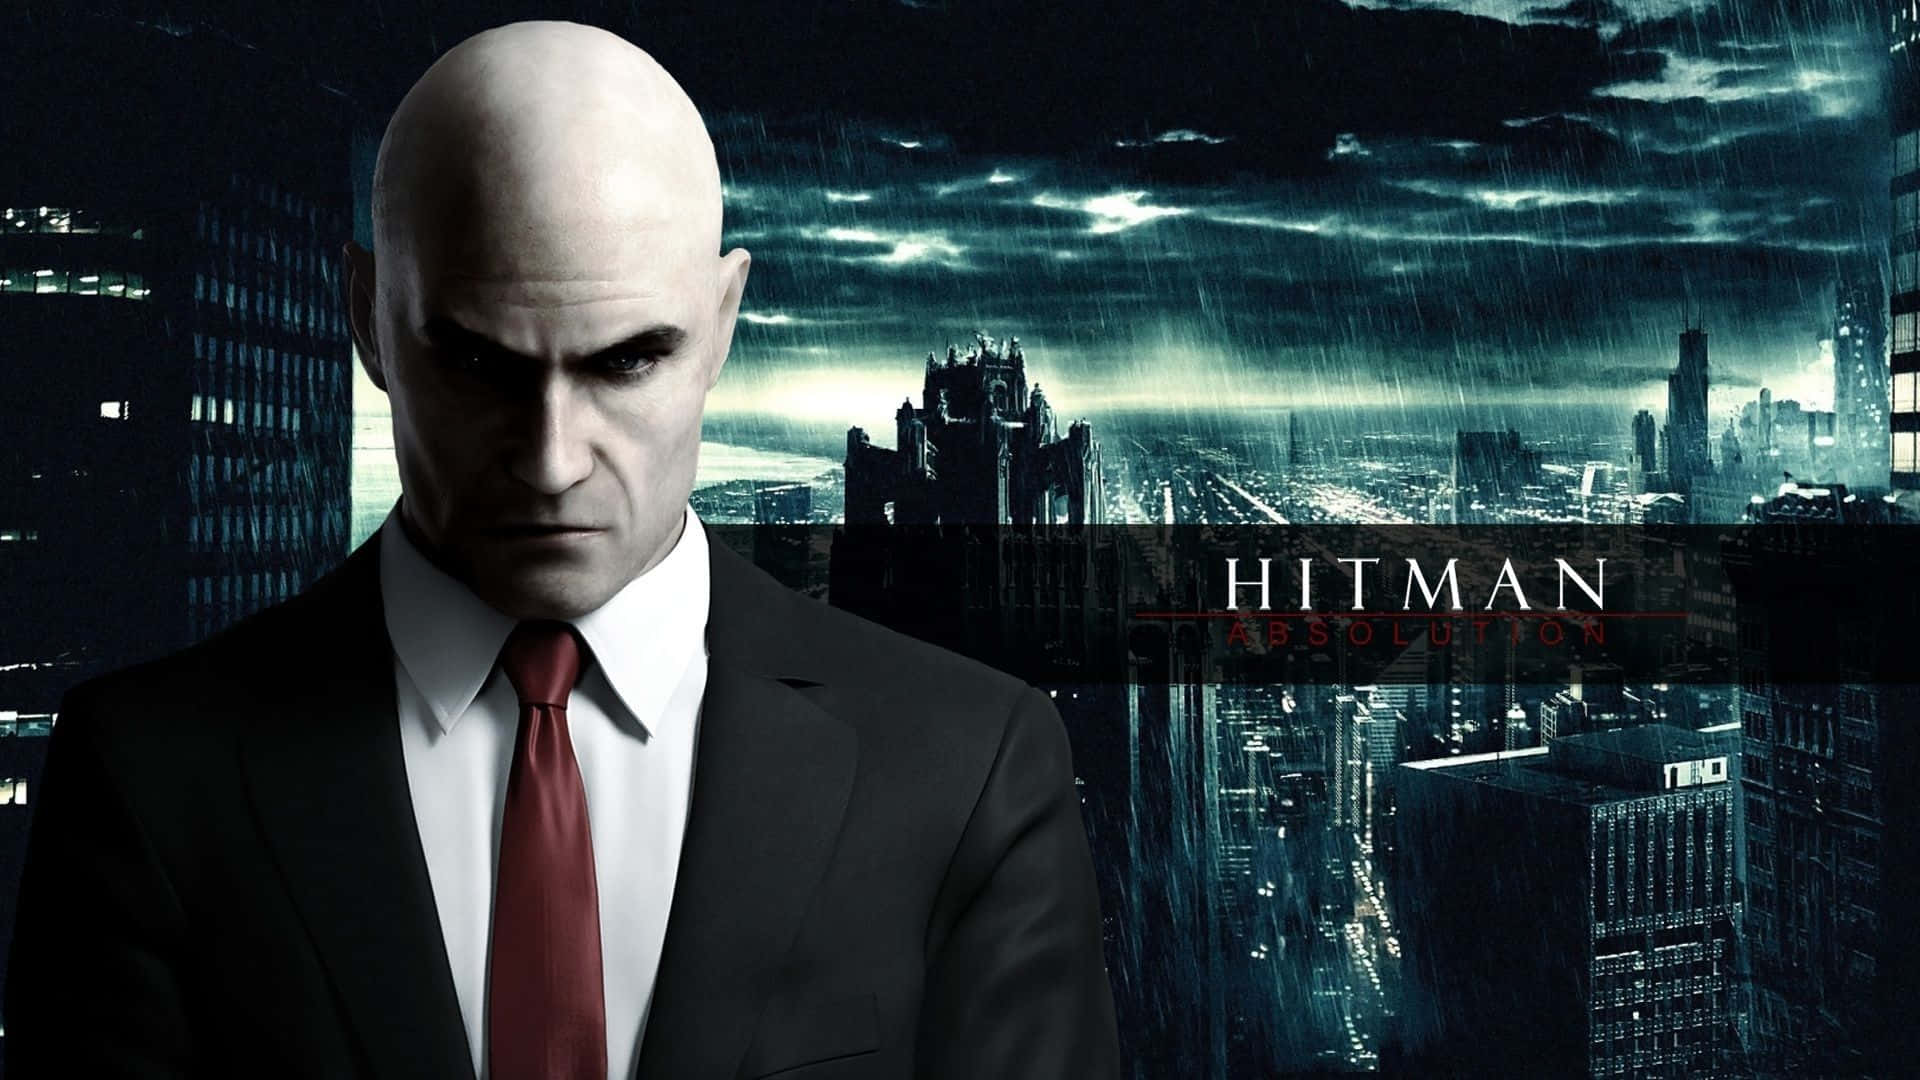 Enter the World of Hitman Absolution